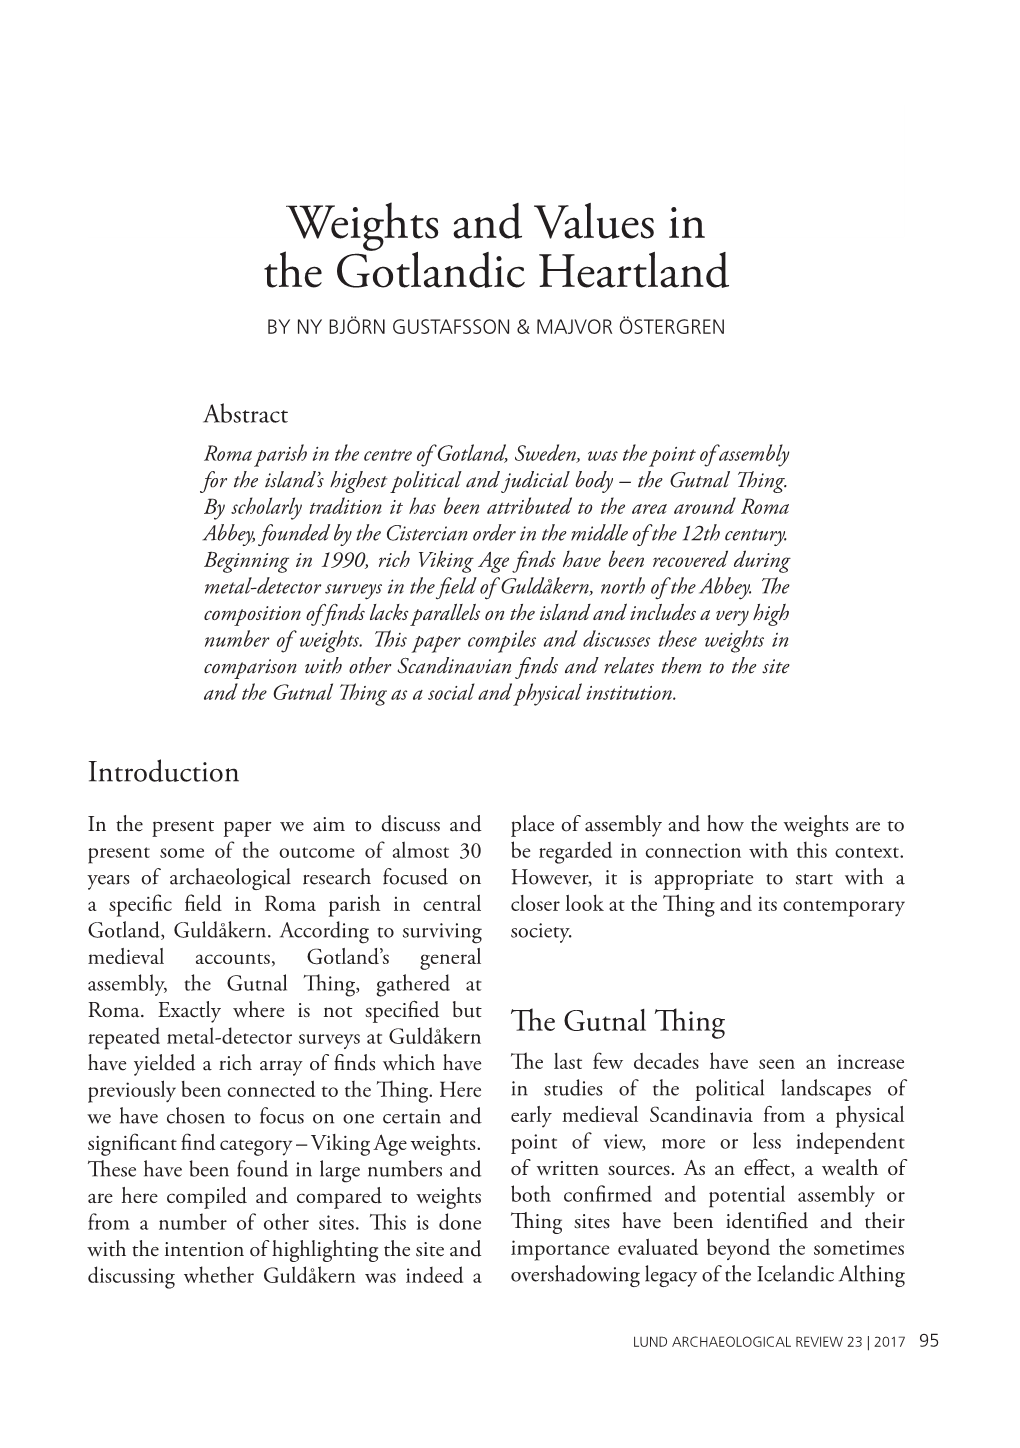 Weights and Values in the Gotlandic Heartland by NY BJÖRN GUSTAFSSON & MAJVOR ÖSTERGREN